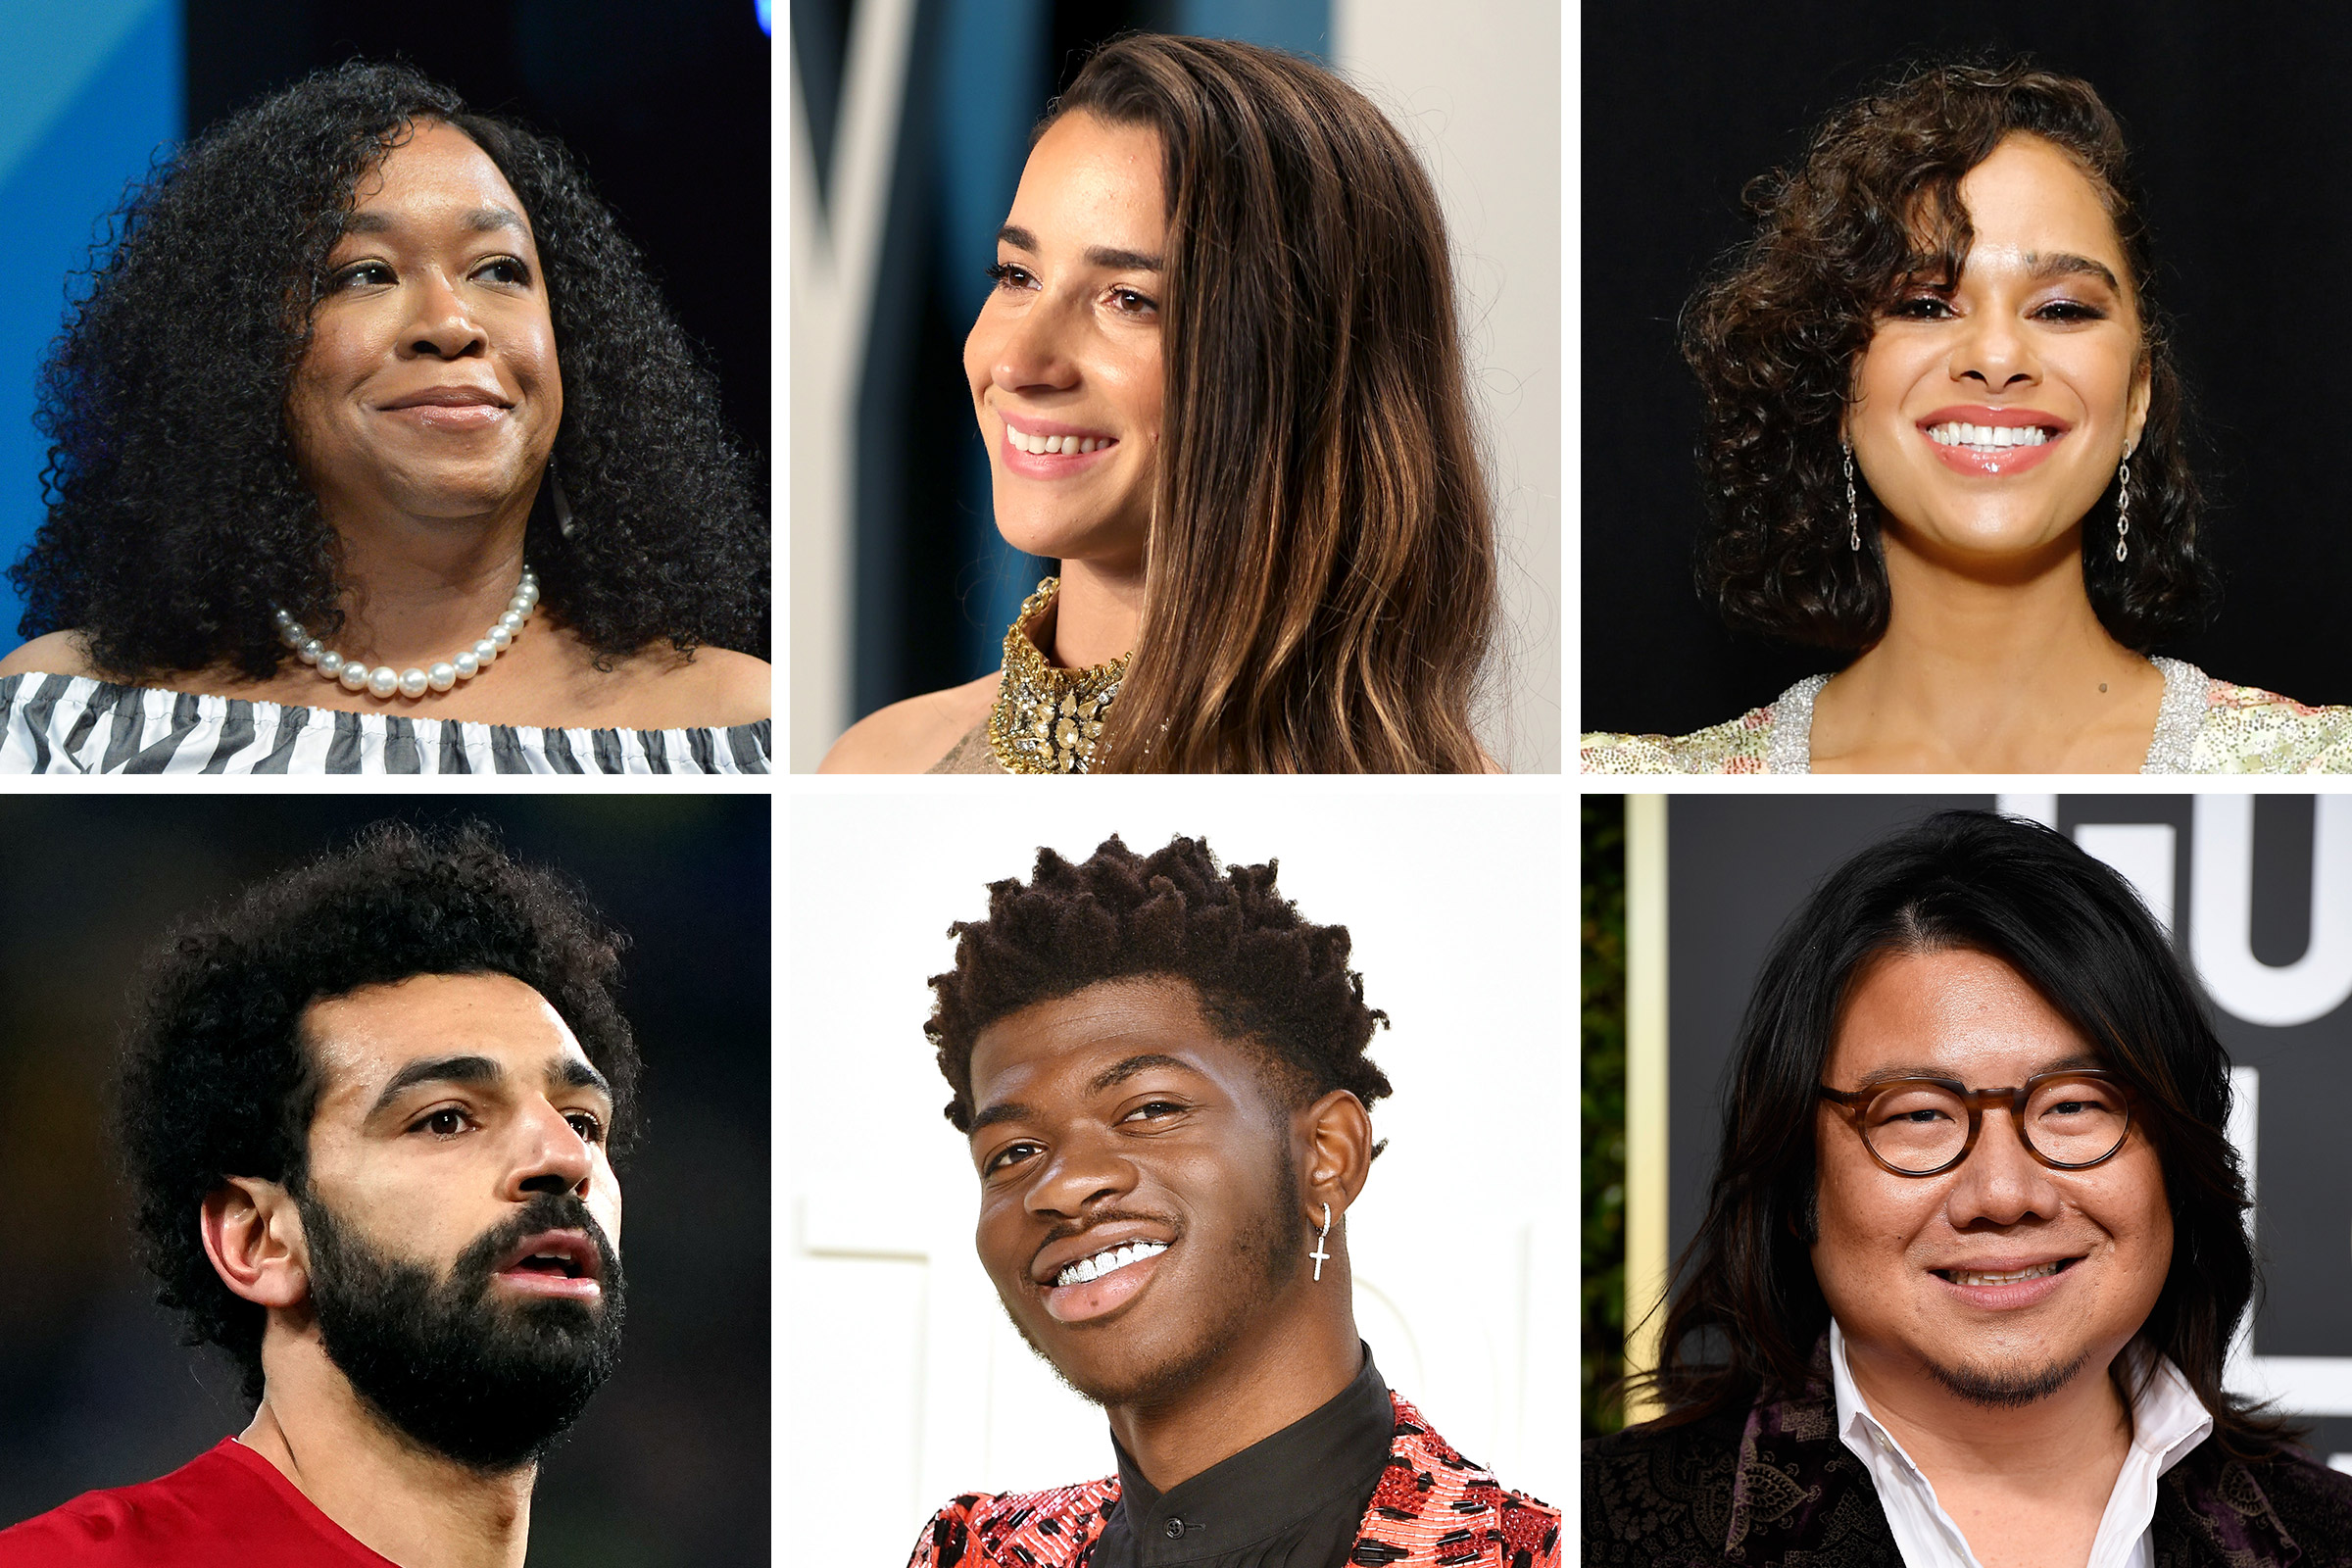 Clockwise from Top Left: Shonda Rhimes, Aly Raisman, Misty Copeland, Kevin Kwan, Lil Nas X, Mohamed Salah (Getty Images (6))